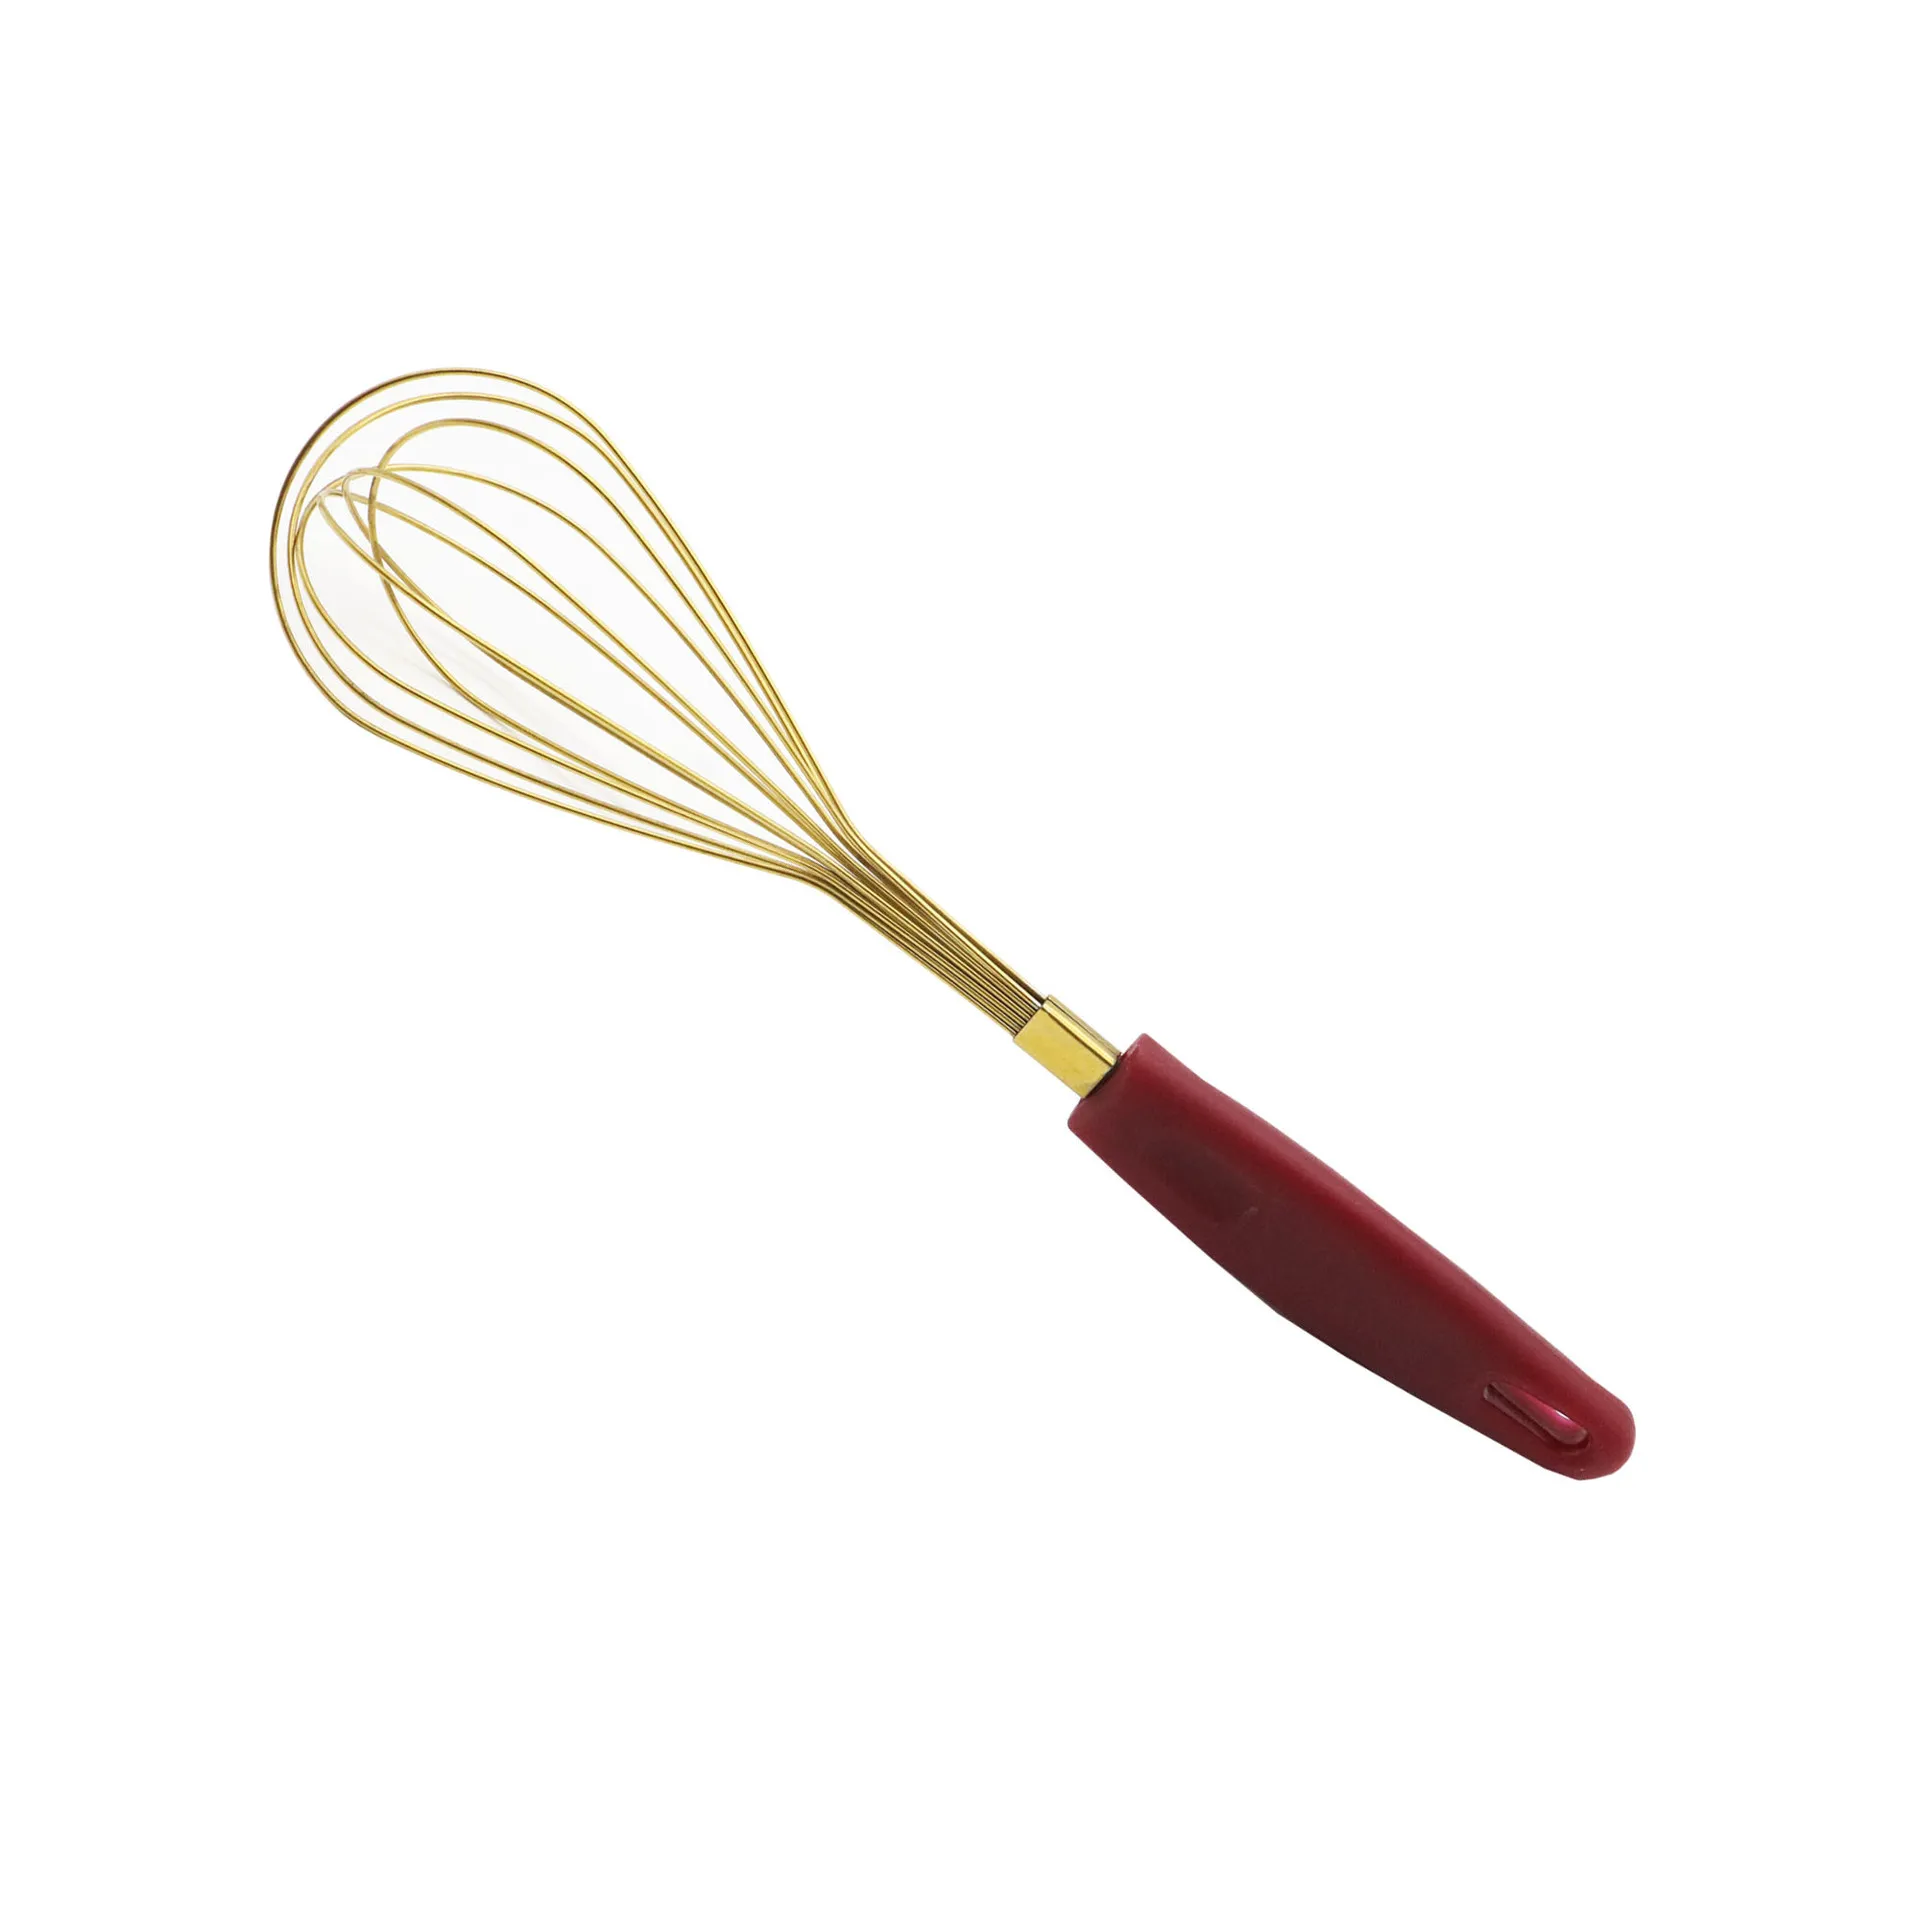 

TY2022 OEM/ODM Kitchen gadgets Stainless Steel Whisk Baking Whipped Cream Mixer Hand-held Manual Whisk, As shown